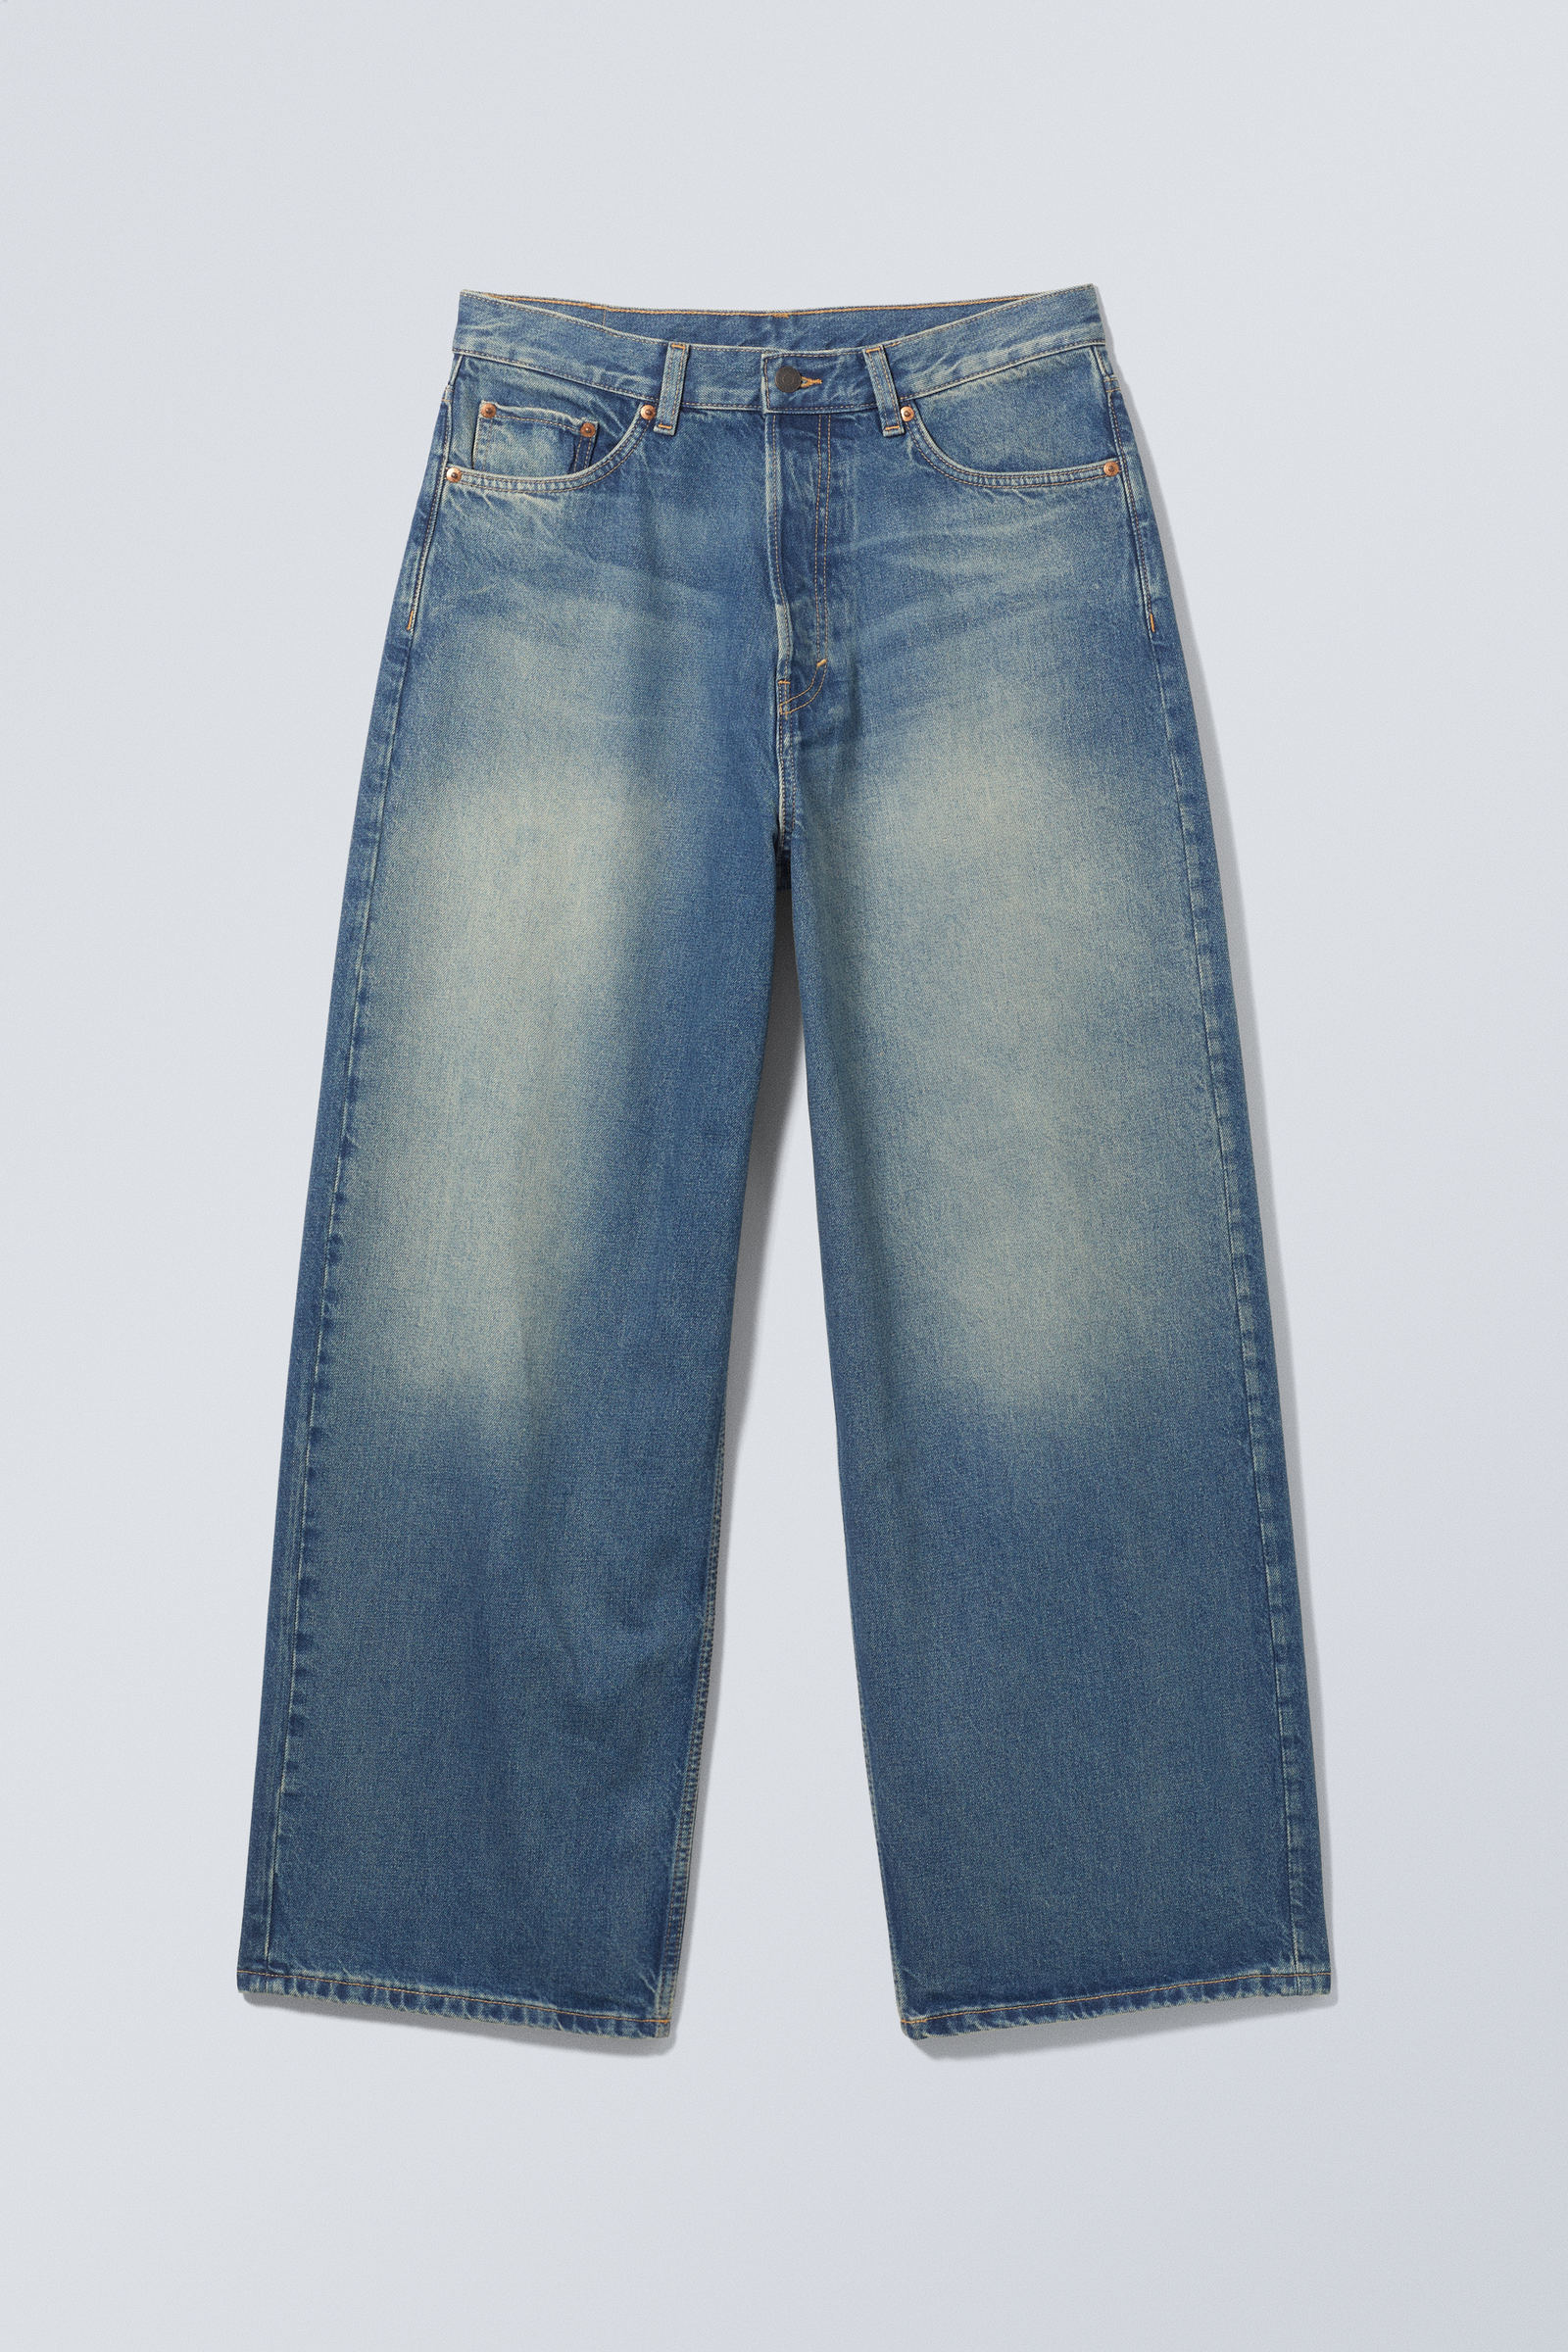 Jackpot Blue - Astro Loose Baggy Jeans - 1